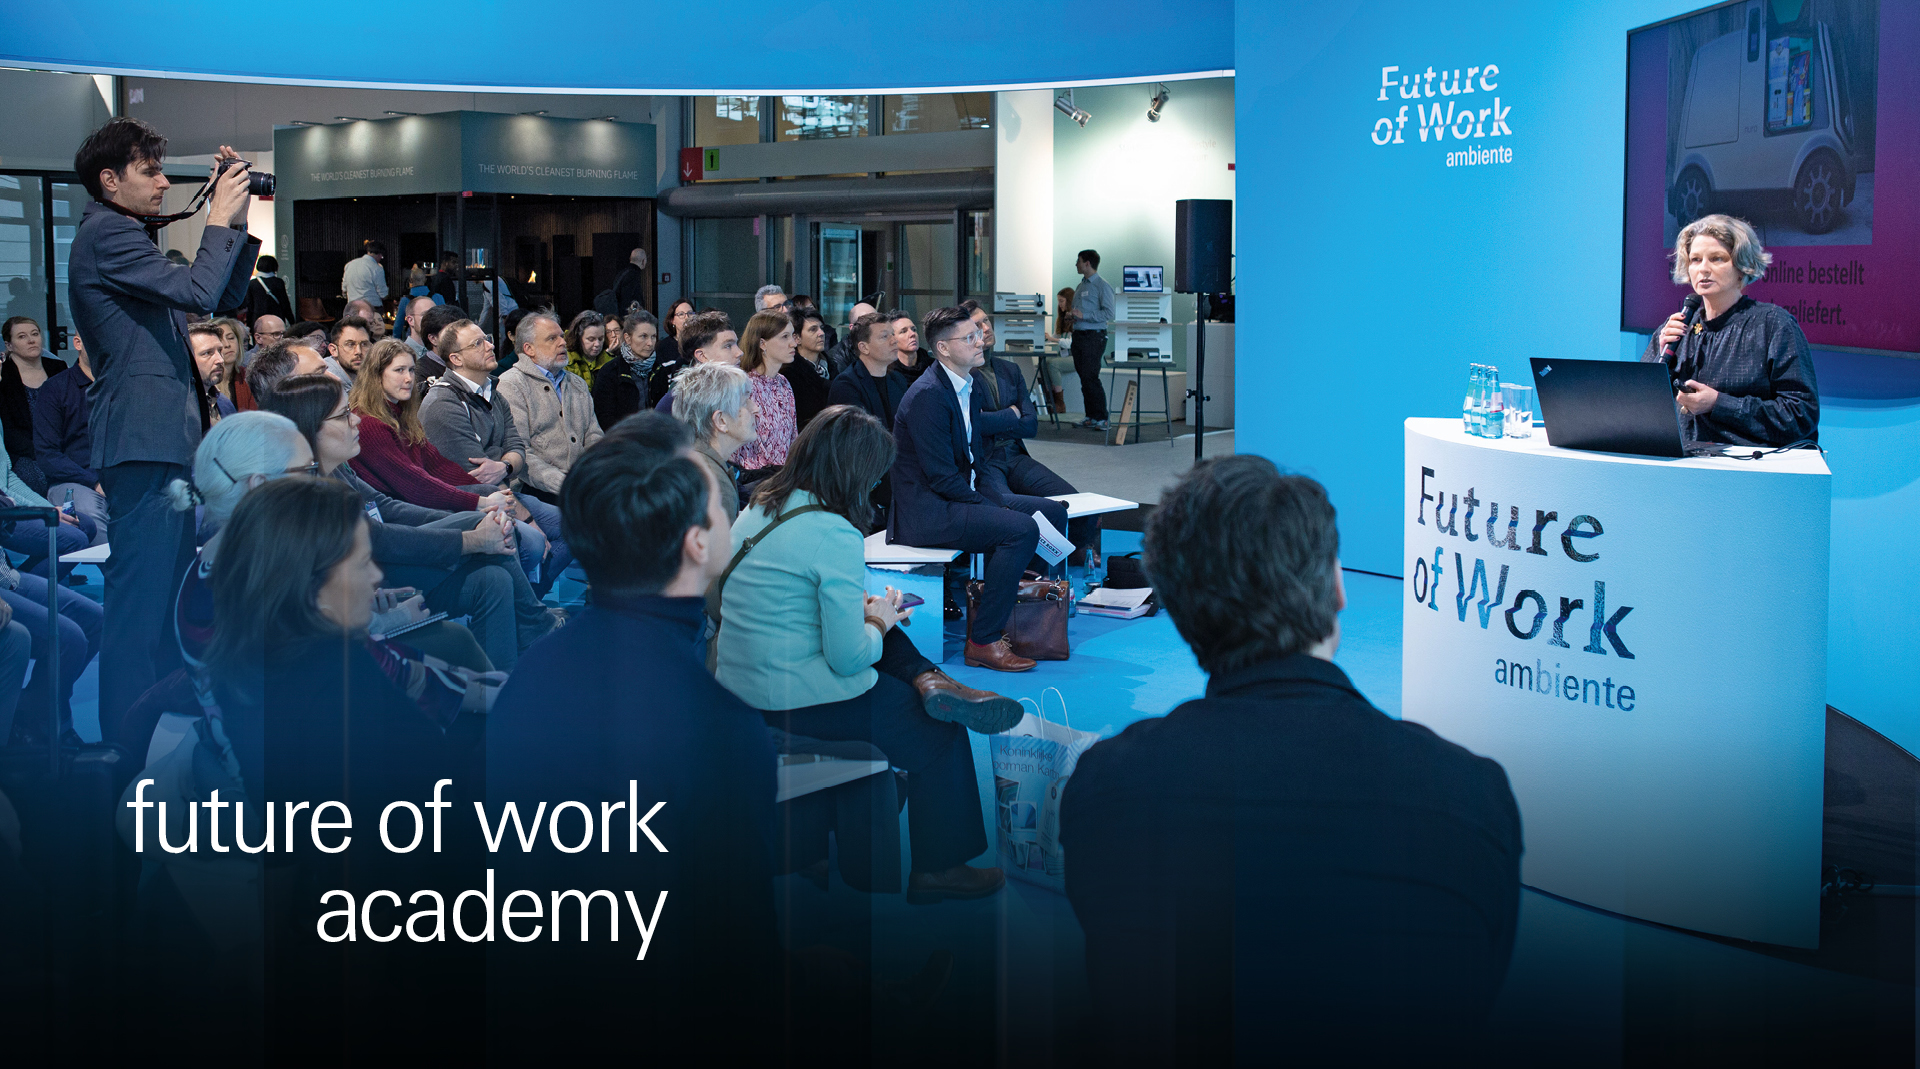 Lecture at the Future of Work Academy Area